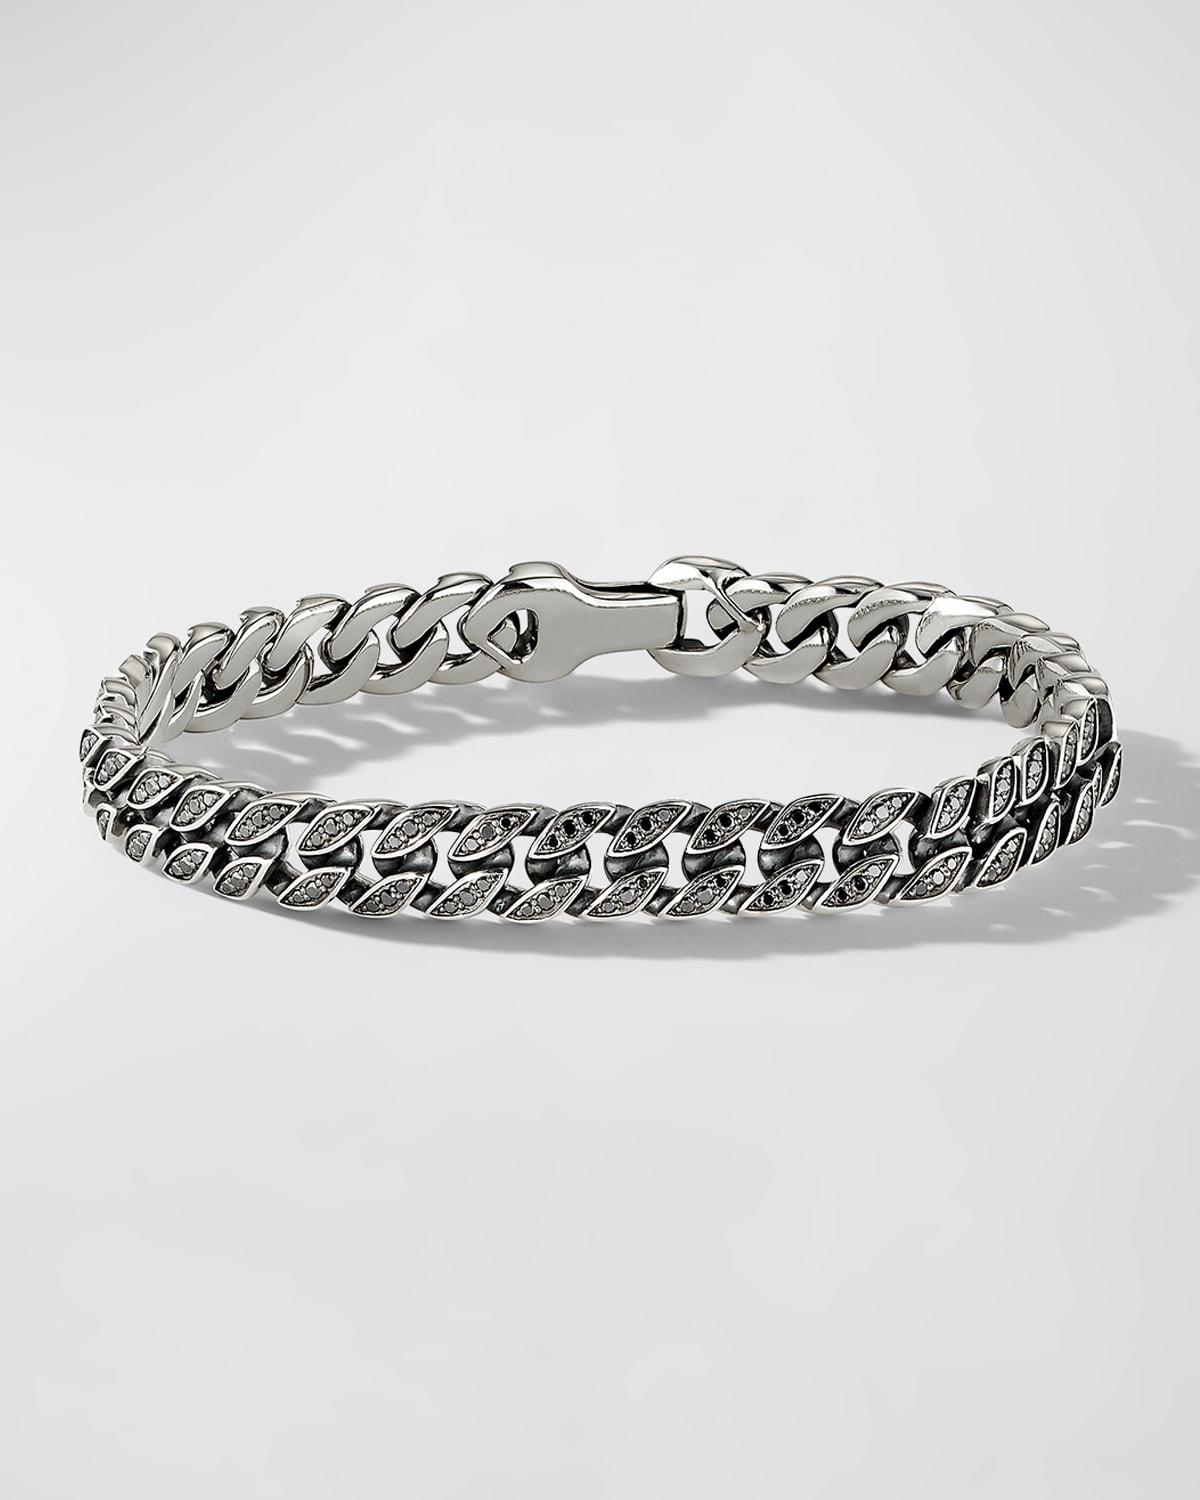 Men's Curb Chain Bracelet in Silver with Diamonds, 8mm, 6.5"L